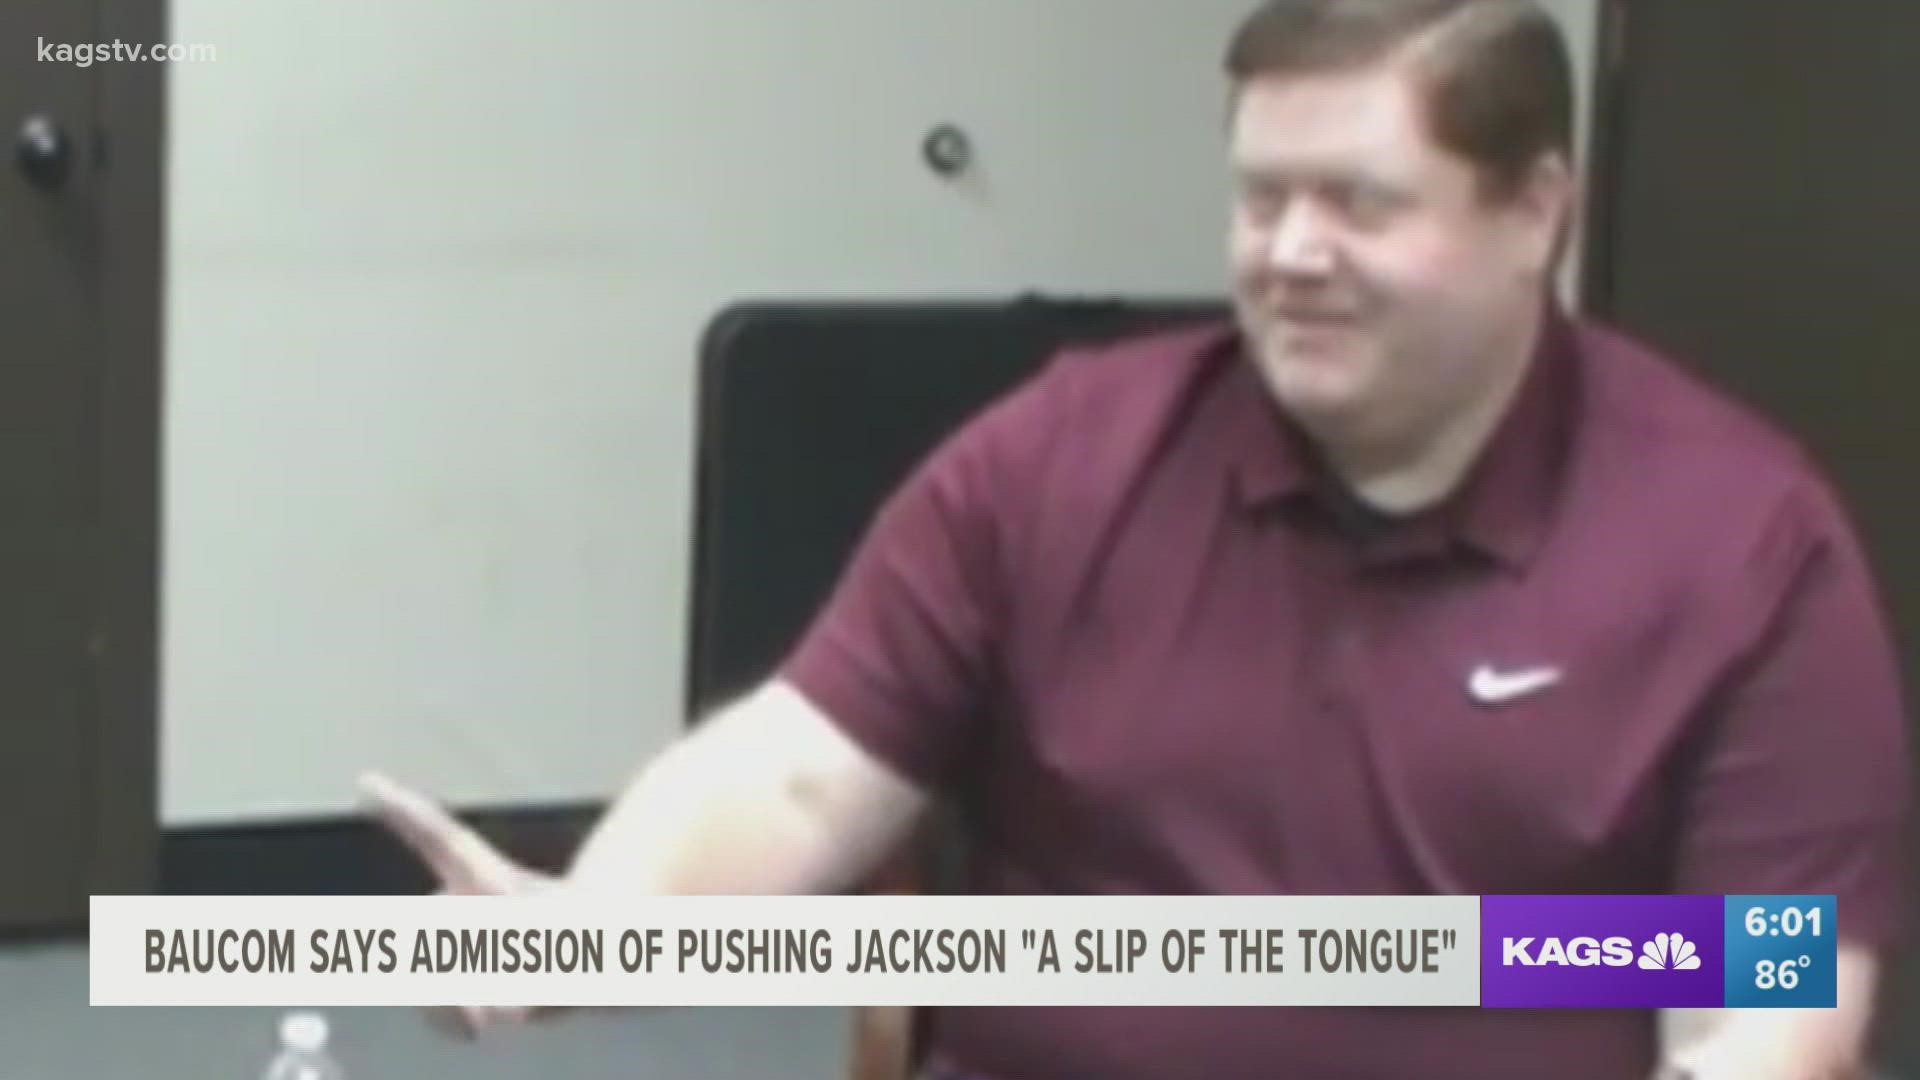 A jury said there was "insufficient evidence" to find Baucom responsible for Jackson's injuries in a civil lawsuit.